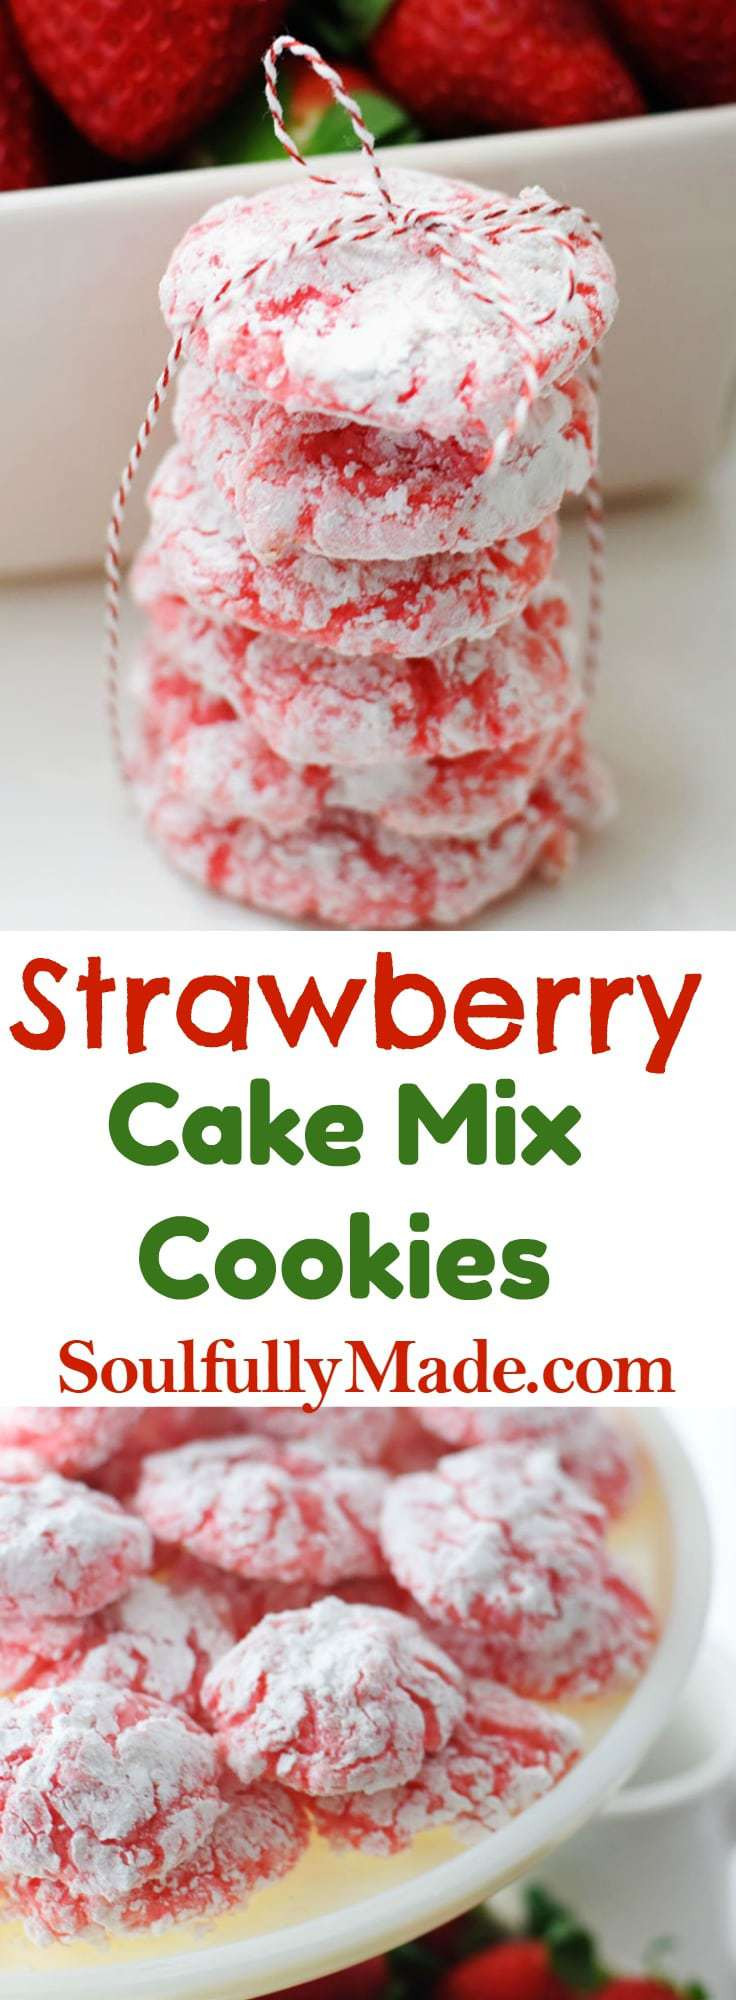 Wedding Cake Recipes From Box Mix
 Strawberry Cake Mix Cookies Soulfully Made